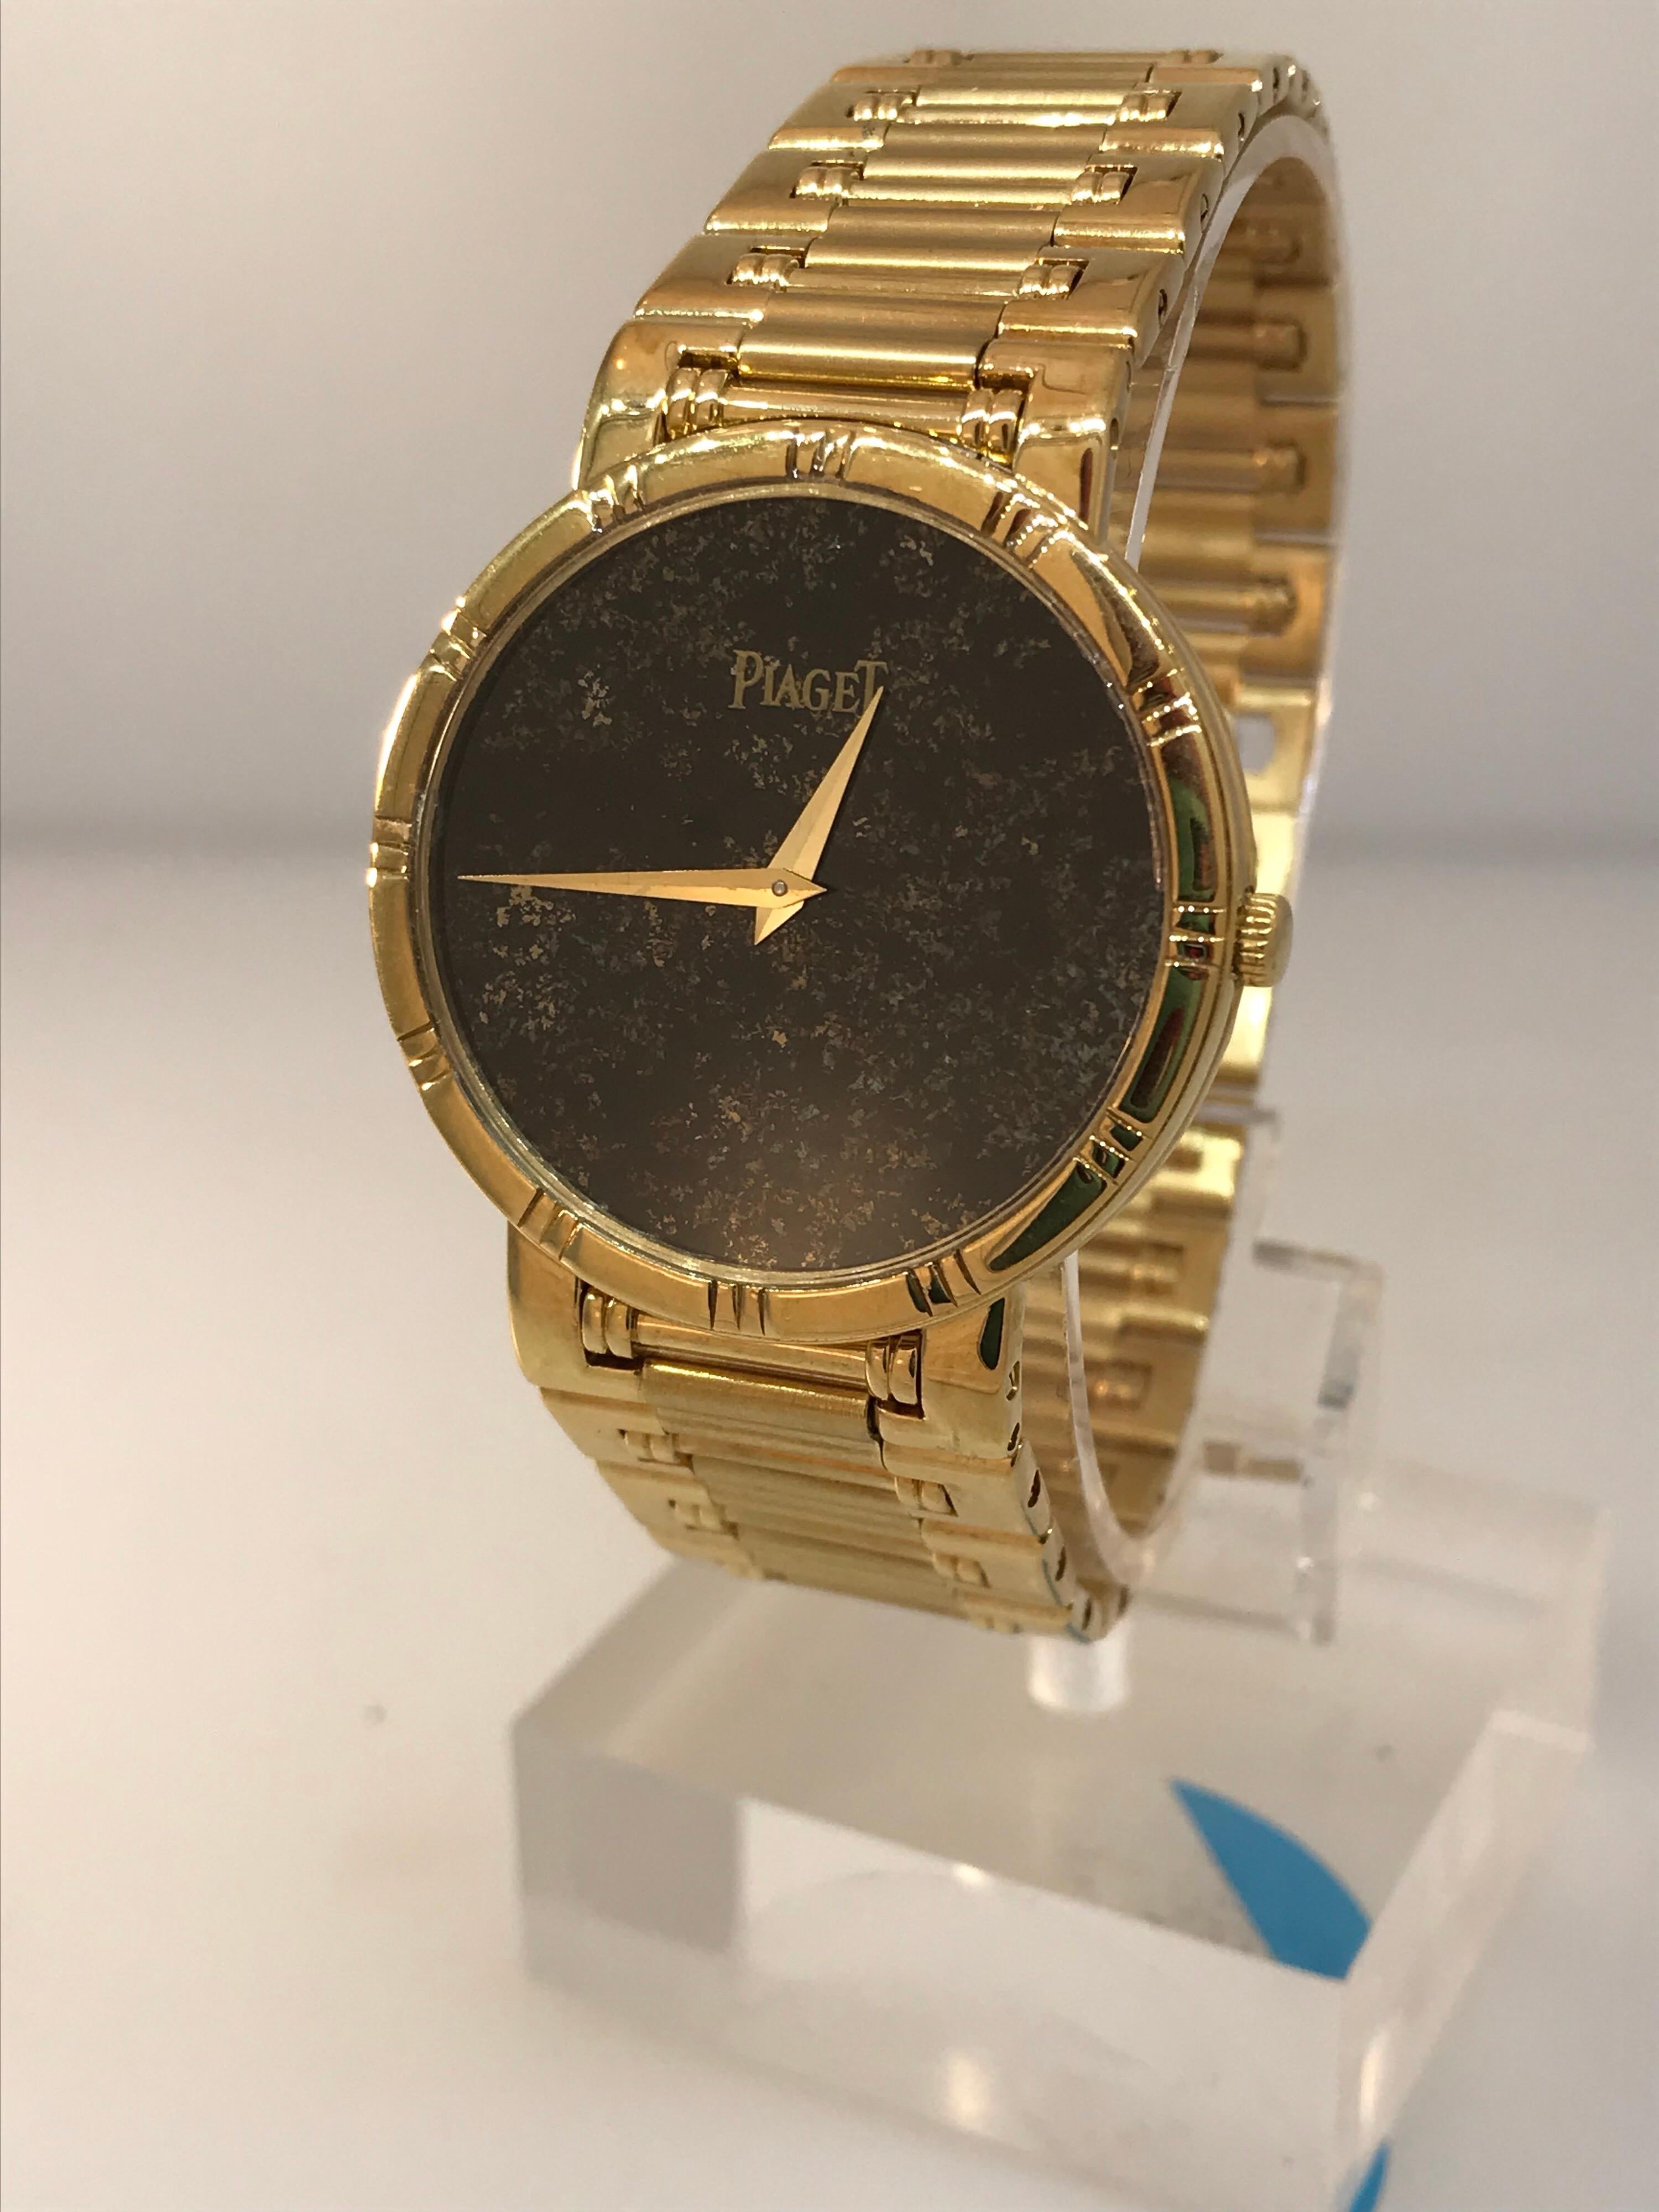 Piaget Dancer Men's Watch

MODEL NUMBER: 84023 K81

100% Authentic

New (old stock)

Comes with a generic watch box

18 Karat Yellow Gold Case & Bracelet

Onyx and Gold Dust Dial

Case Diameter: 32mm

Fits up to a 7.5 Inch Wrist